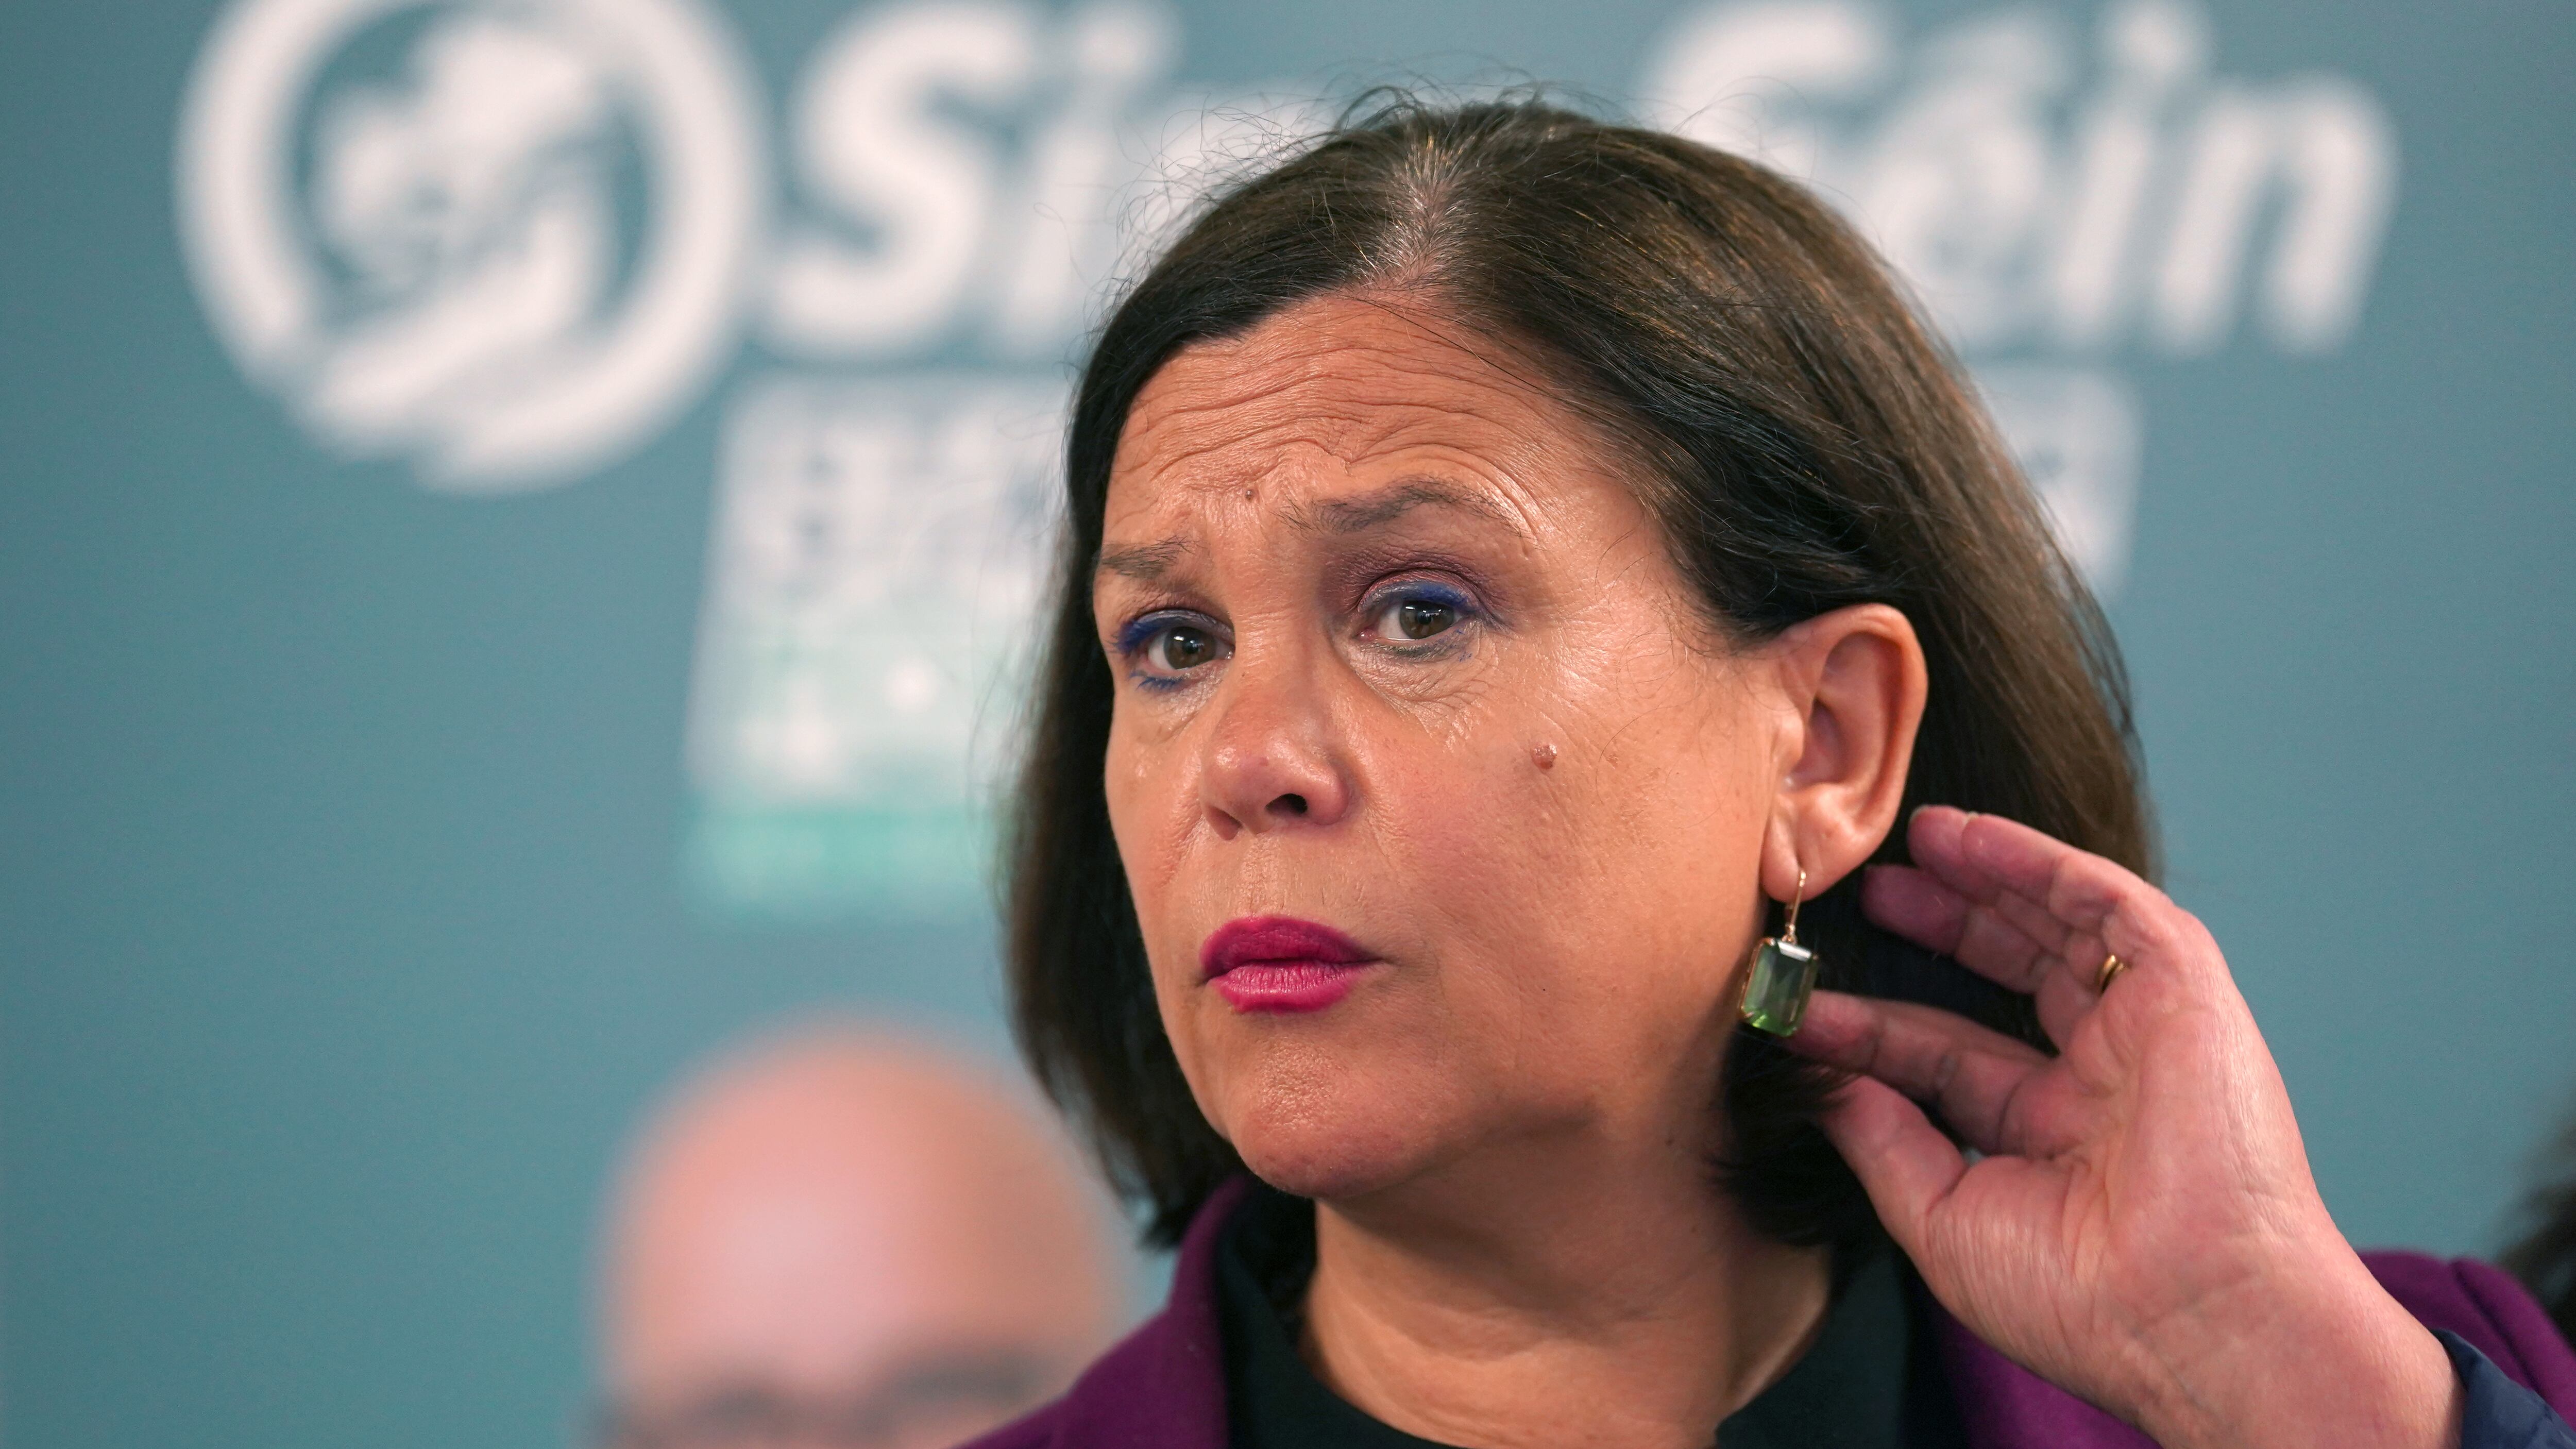 Sinn Fein President Mary Lou McDonald speaking at the launch of the party’s manifesto for the European election campaign at Temple Bar Gallery and Studios in Dublin